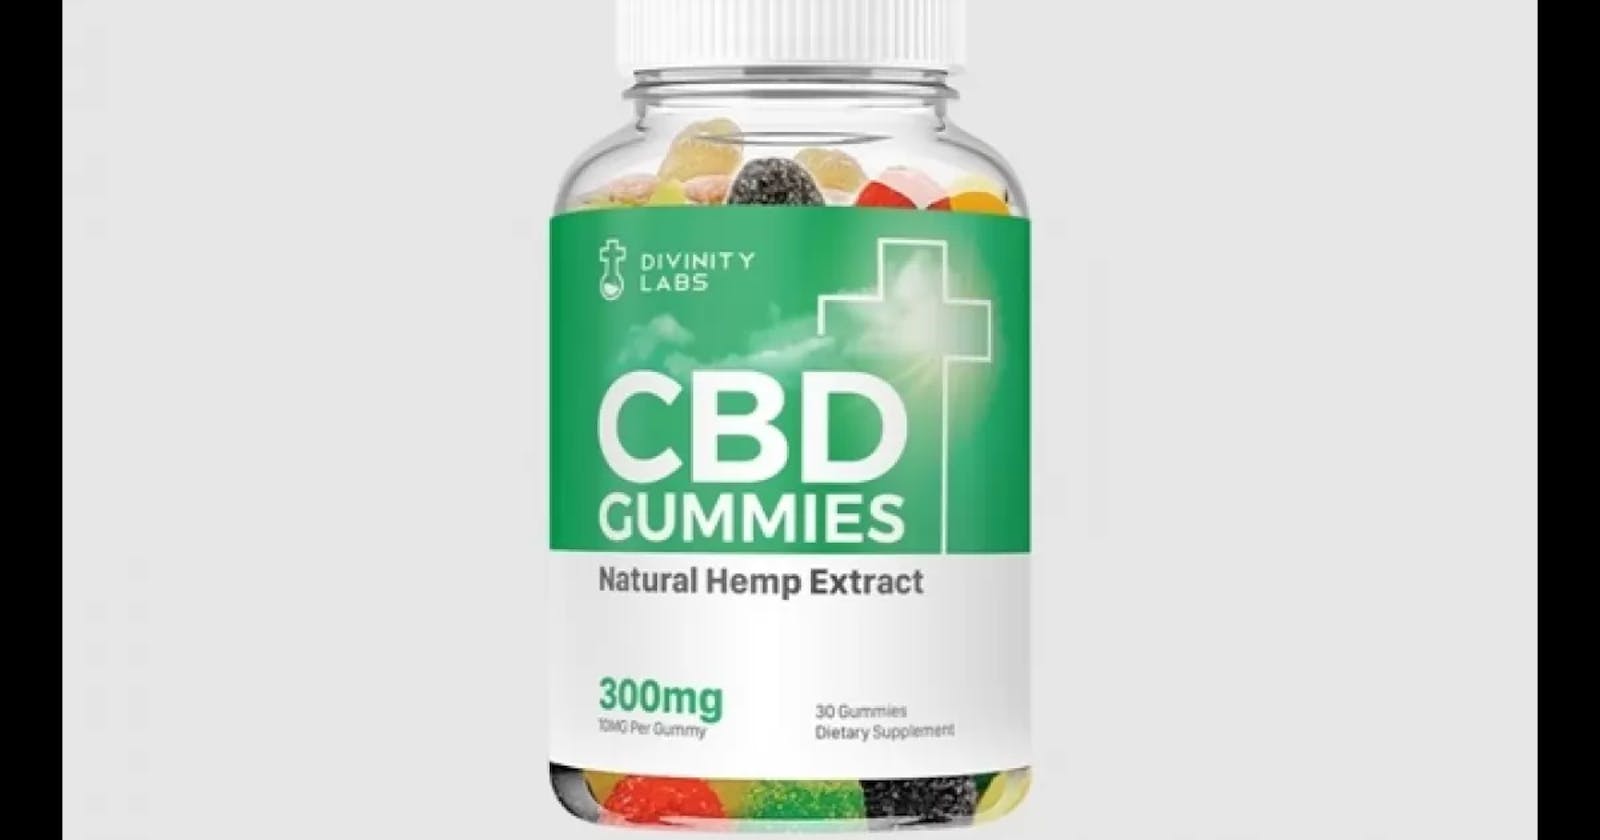 Divinity Labs CBD Gummies : Reduces Anxiety, Depression & Tension!